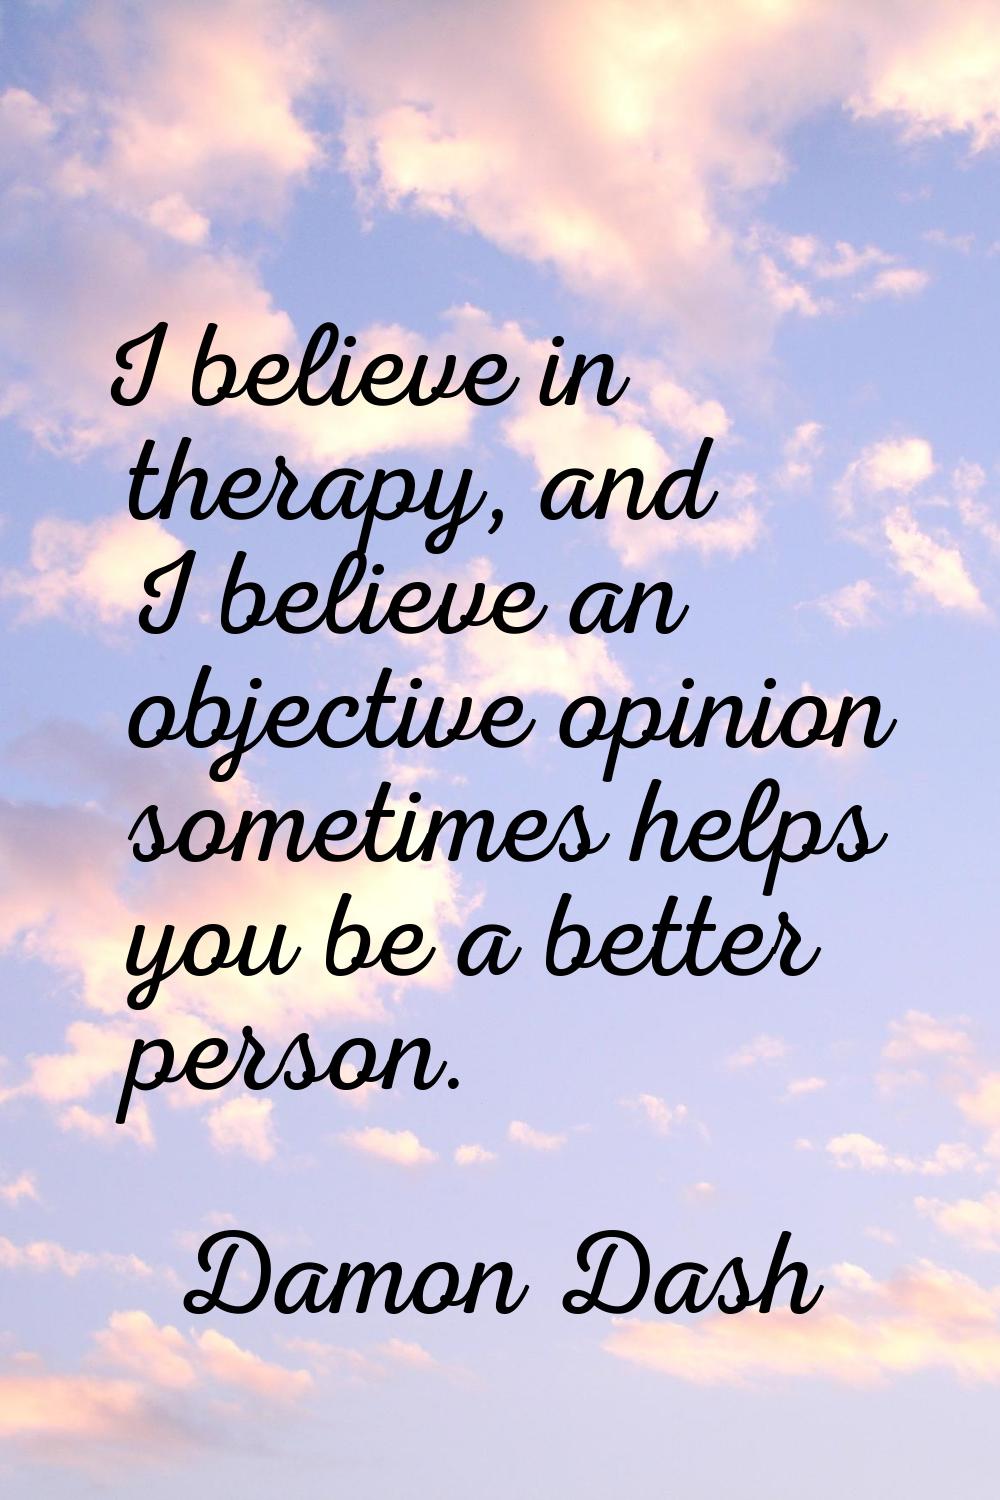 I believe in therapy, and I believe an objective opinion sometimes helps you be a better person.